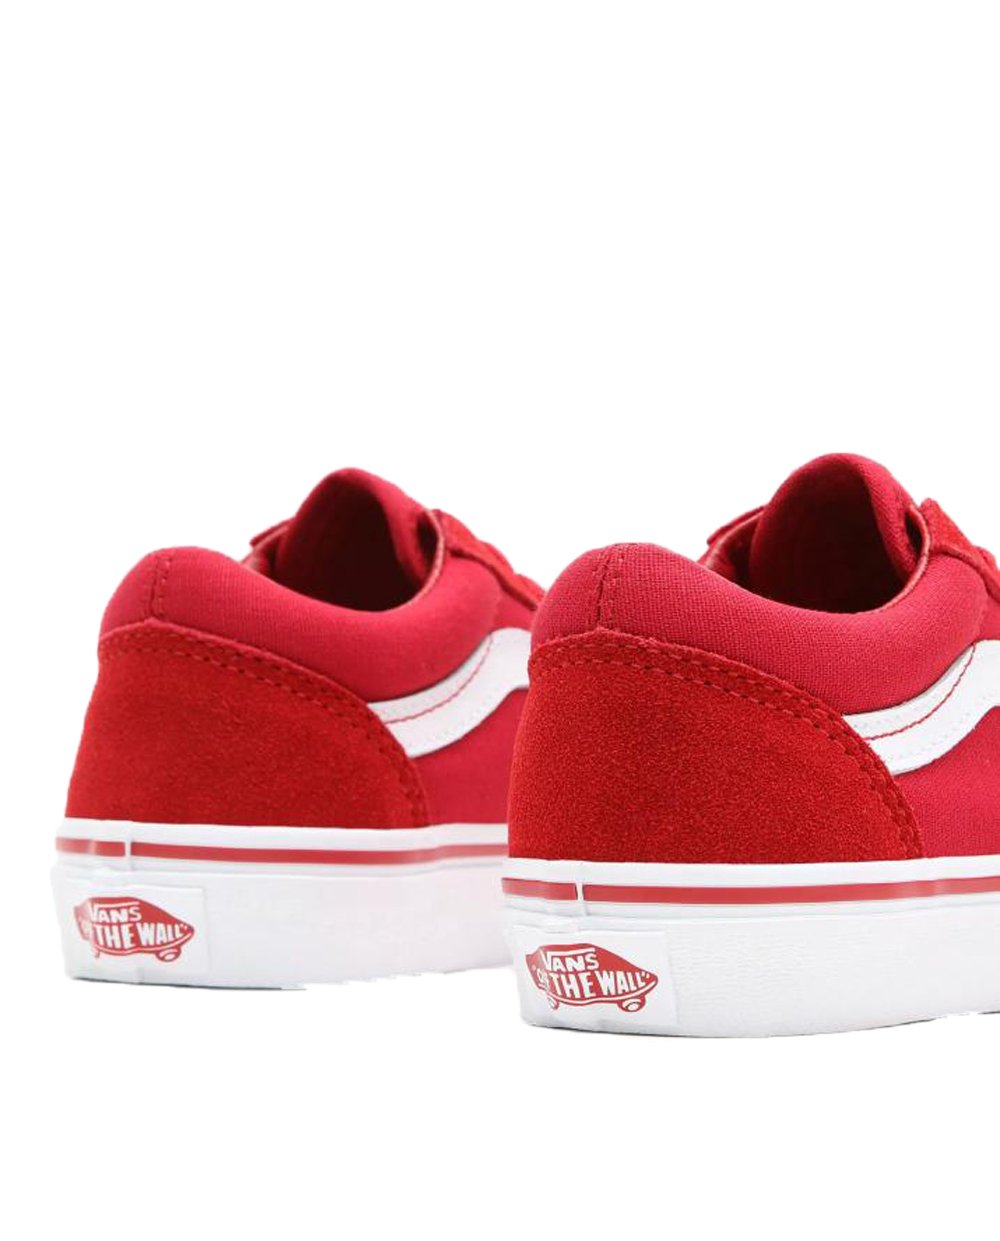 Vans Old Skool Red with White Stripe and Squares